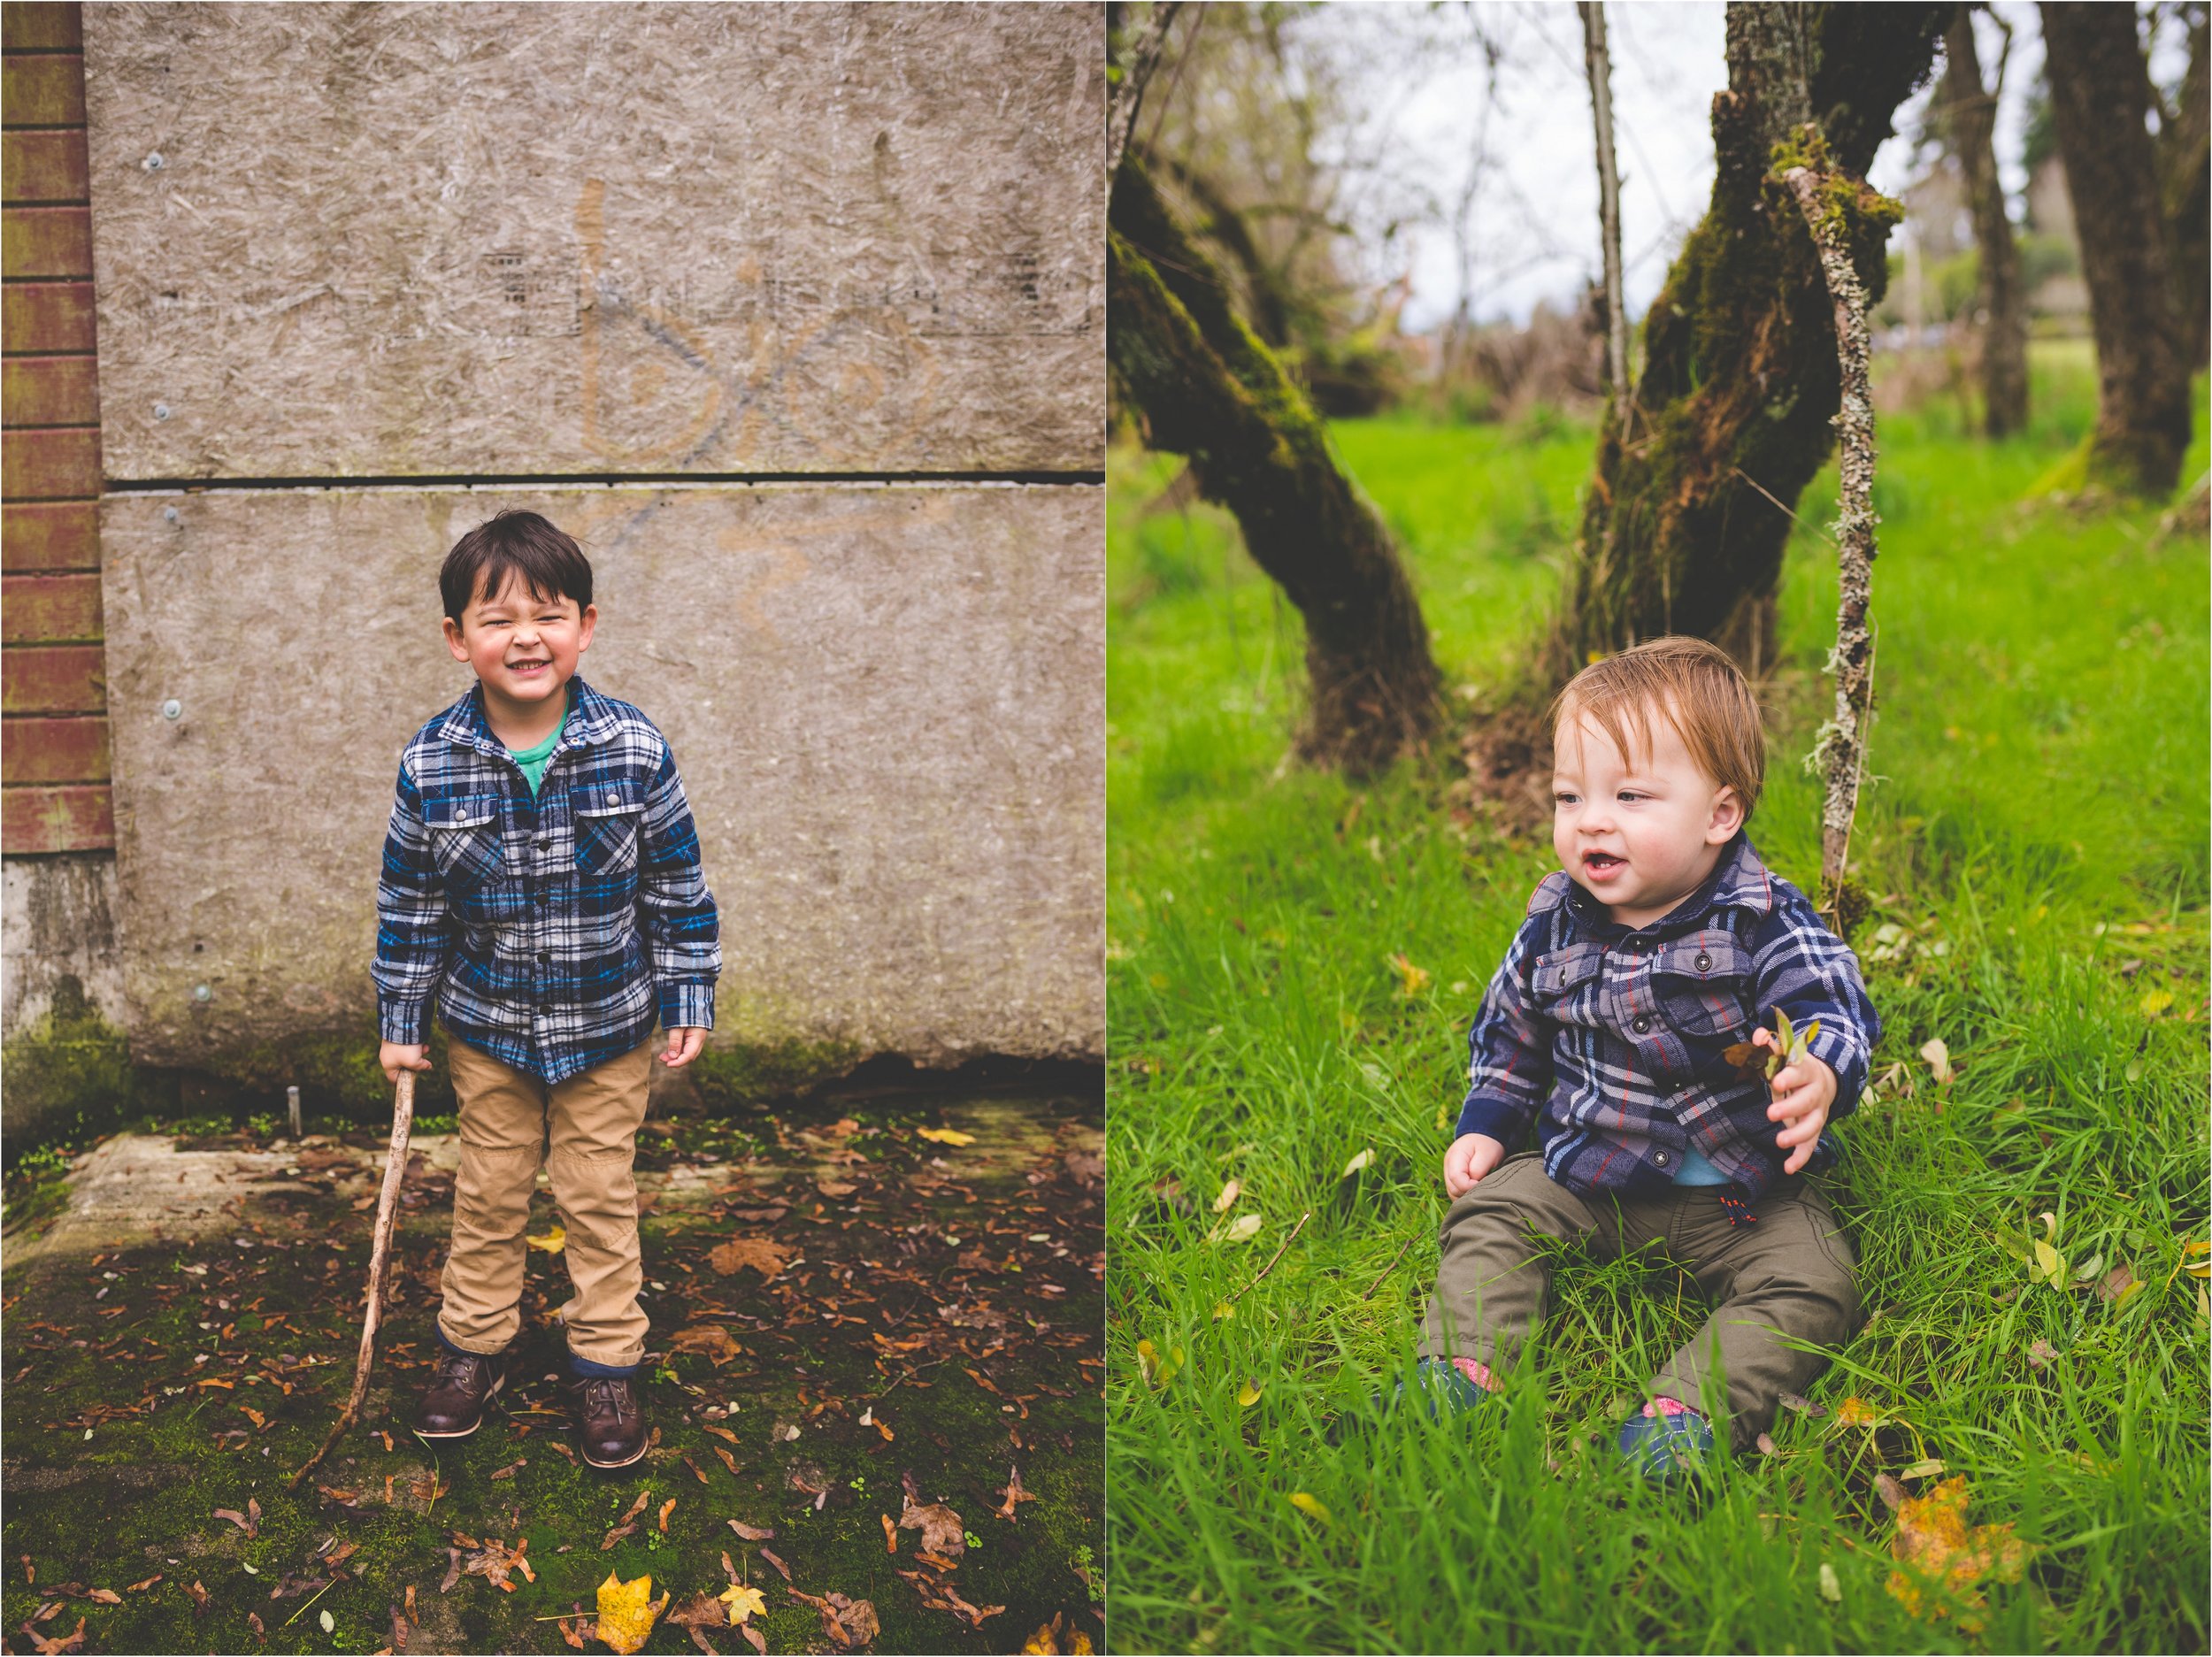 fort-steilacoom-park-family-session-jannicka-mayte-pacific-northwest-lifestyle-photographer_0024.jpg